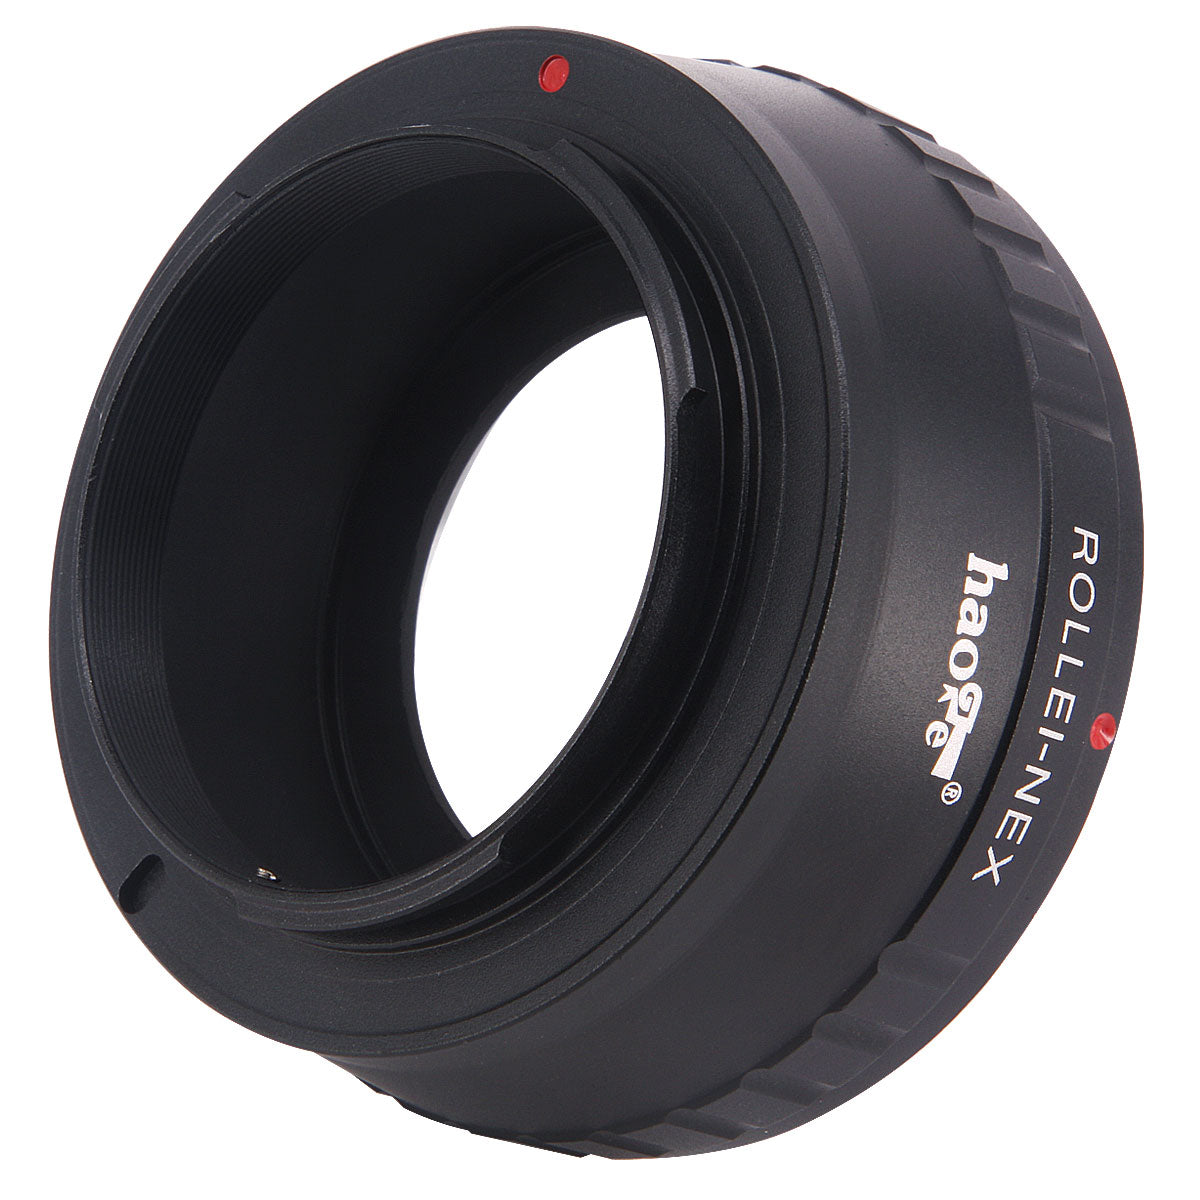 Haoge Manual Lens Mount Adapter for Rollei 35 SL35 QBM Quick Bayonet Mount Lens to Sony E mount NEX Camera as NEX-5, NEX-5N, NEX-7, NEX-7N, a6500, a6300, a6000, a5000, a3500, a3000, NEX-VG10, VG20